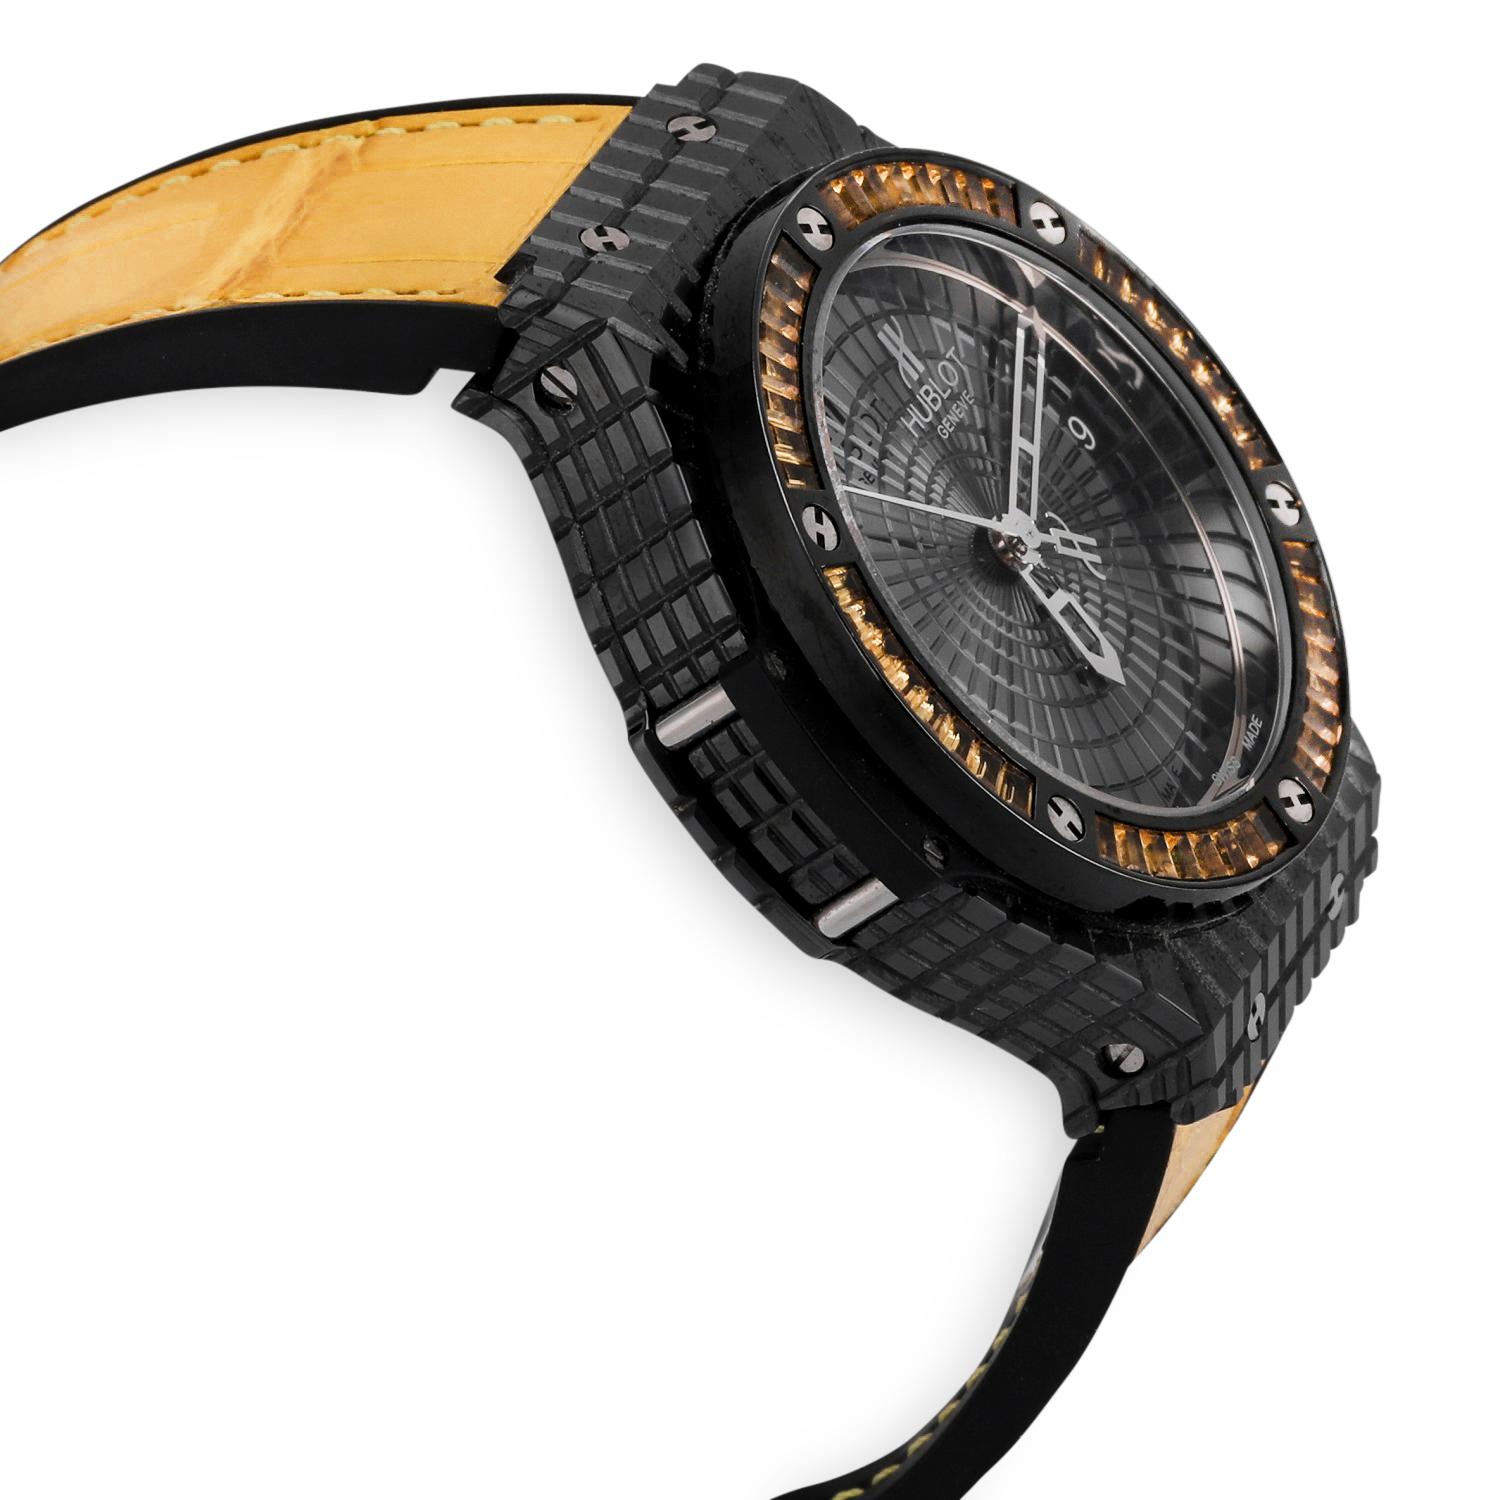 Stainless steel/black ceramic case and baguette citrine gemstone bezel
Self-winding movement Calibre HUB1112
Reference Number: 346.CD.1800.LR.1915
Scratch-resistant sapphire with anti-reflective treatment
Dial:  Polished black ceramic